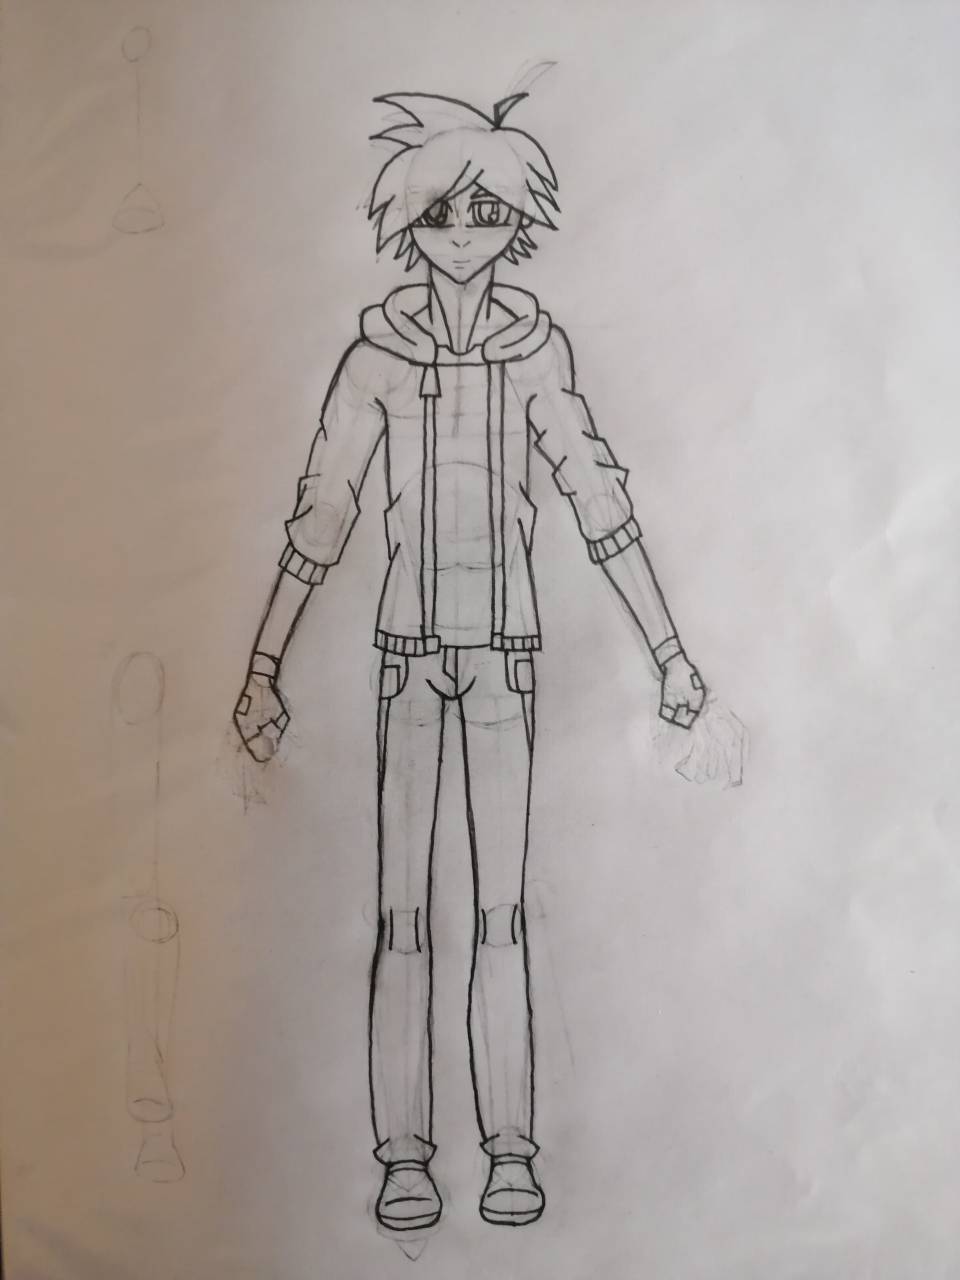 Anime boy with a default pose (front) by DanieltheSwordtaX on DeviantArt